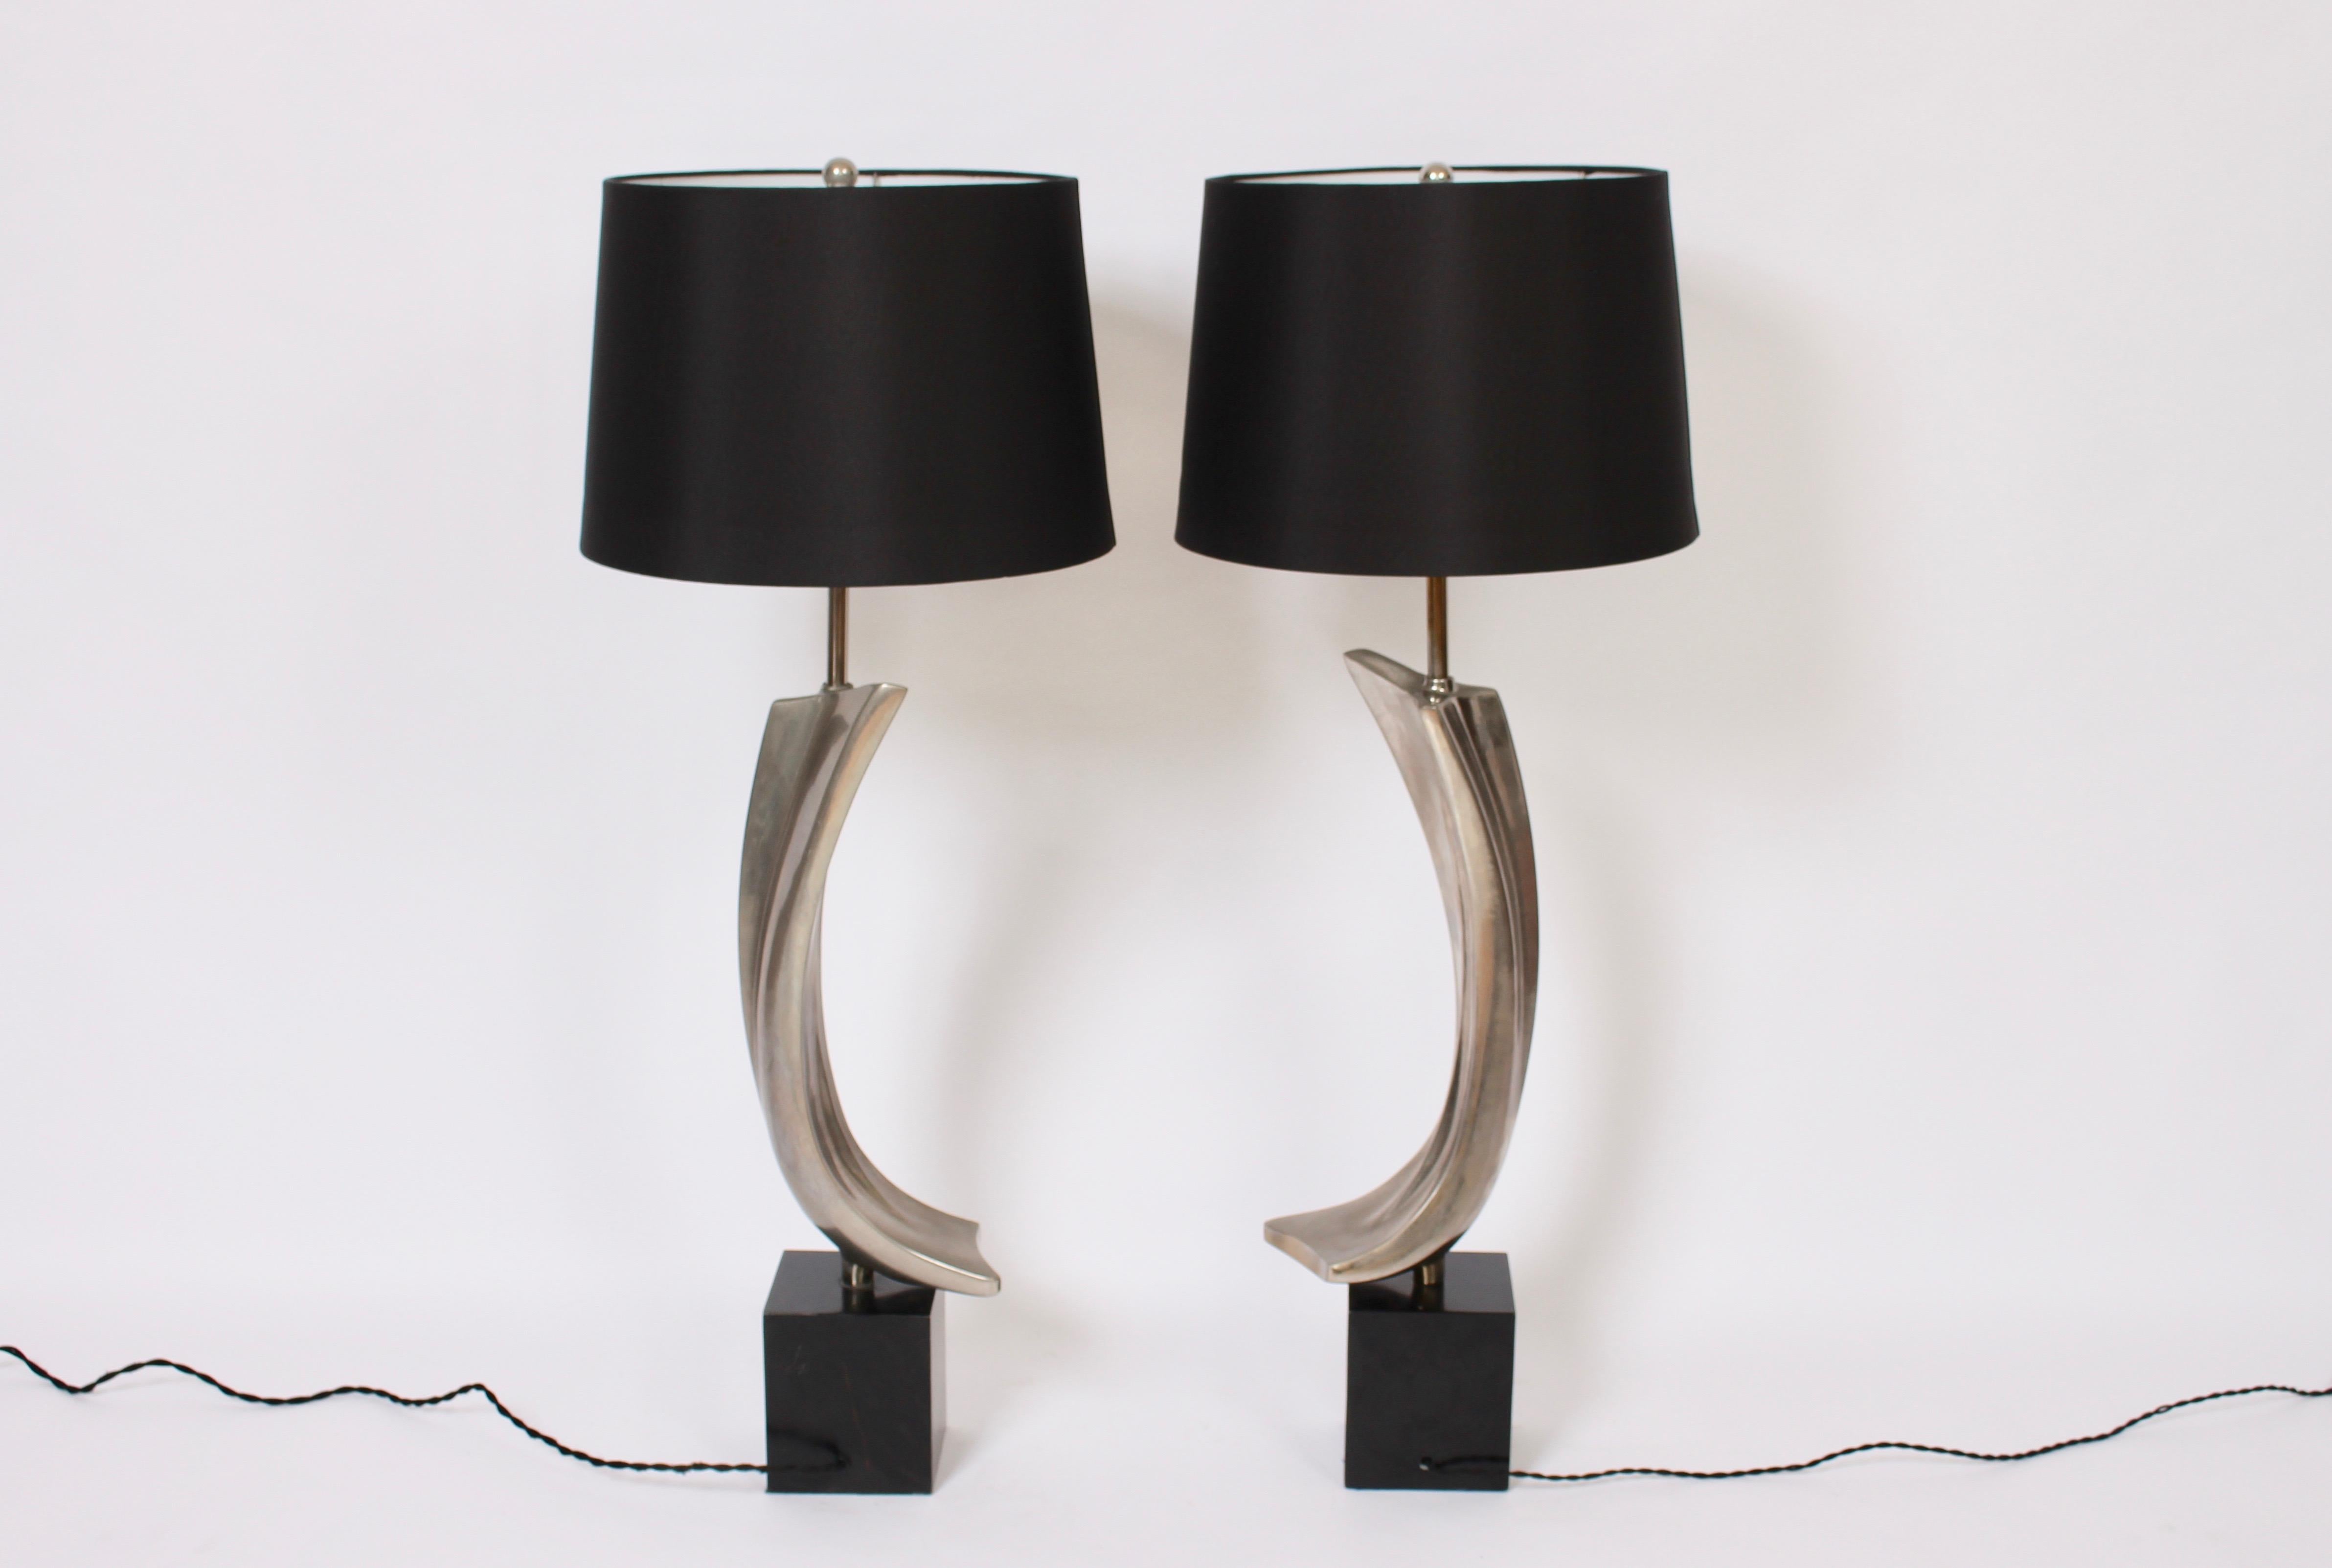 Substantial pair of Laurel Lamp Company H-1053 Table Lamps in Chromed Metal with Black Metal base. Circa 1970. Featuring Nickel plated slender curved metal forms on rectangular Black Metal 6